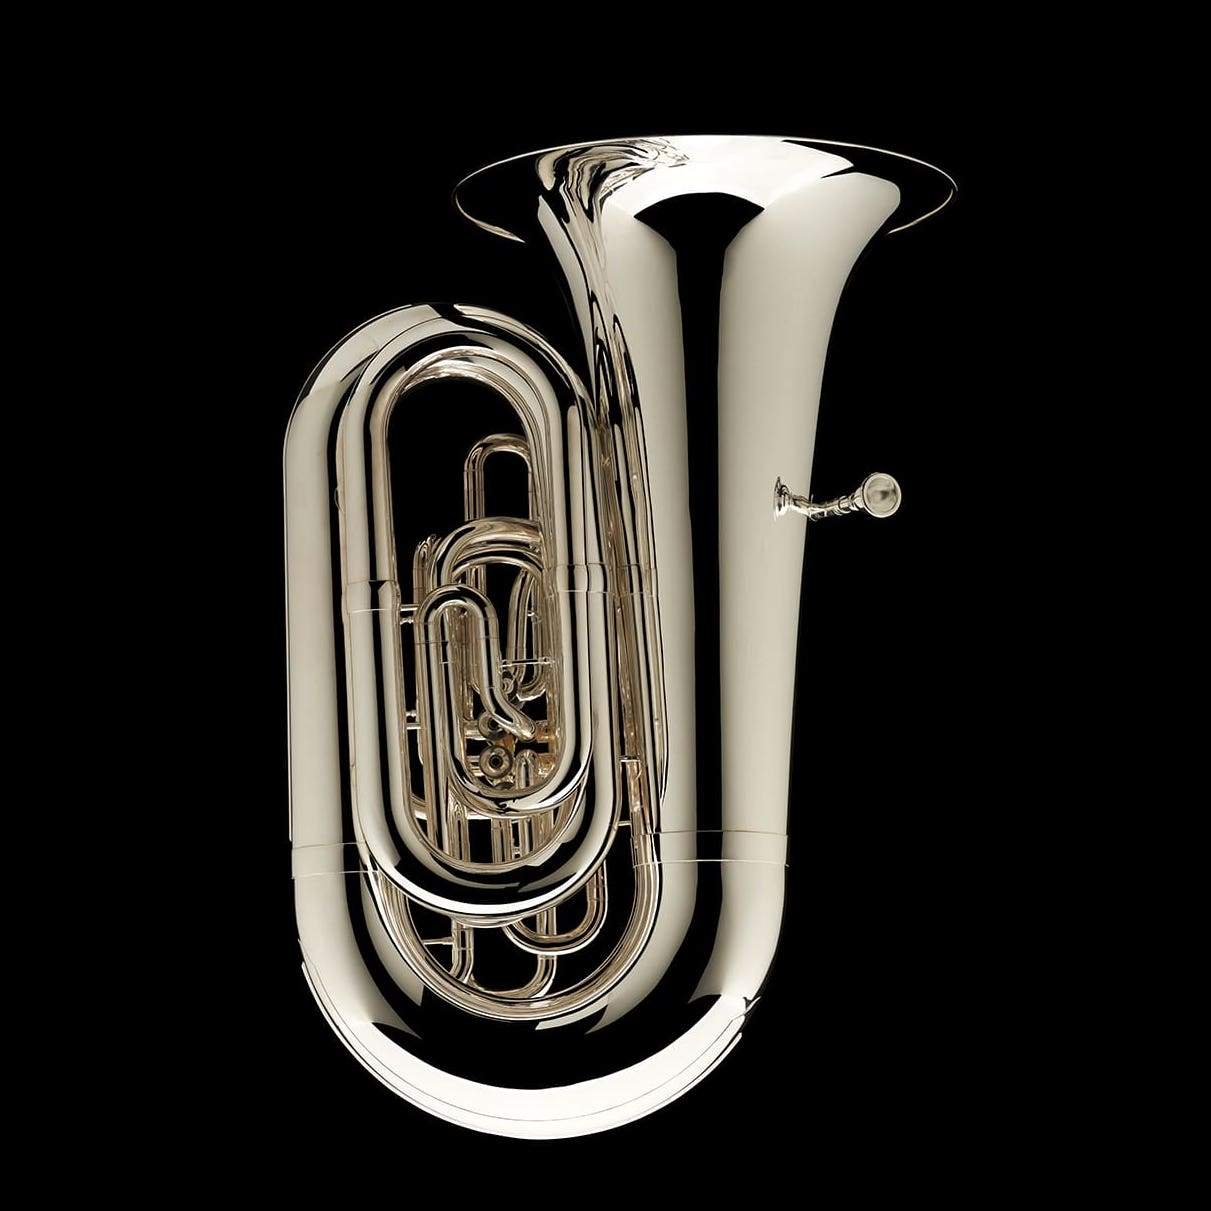 An alternative image of a BBb 6/4 Tuba with 5-valves 'Prokofiev' in silver-plate from Wessex Tubas